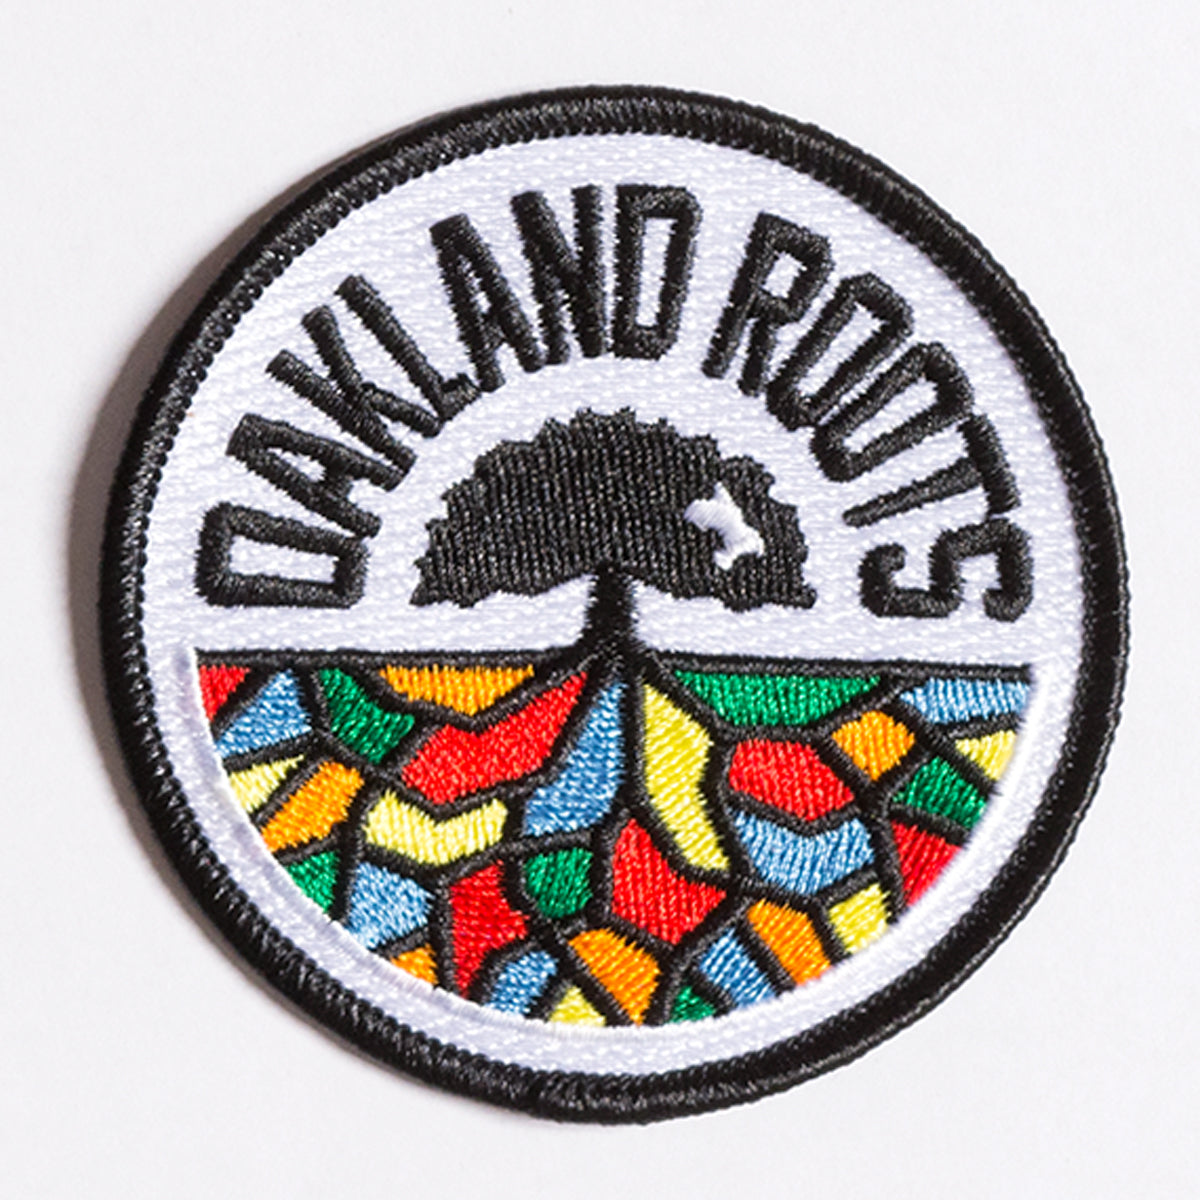 Embroidered round patch of Oakland Roots full-color logo crest.